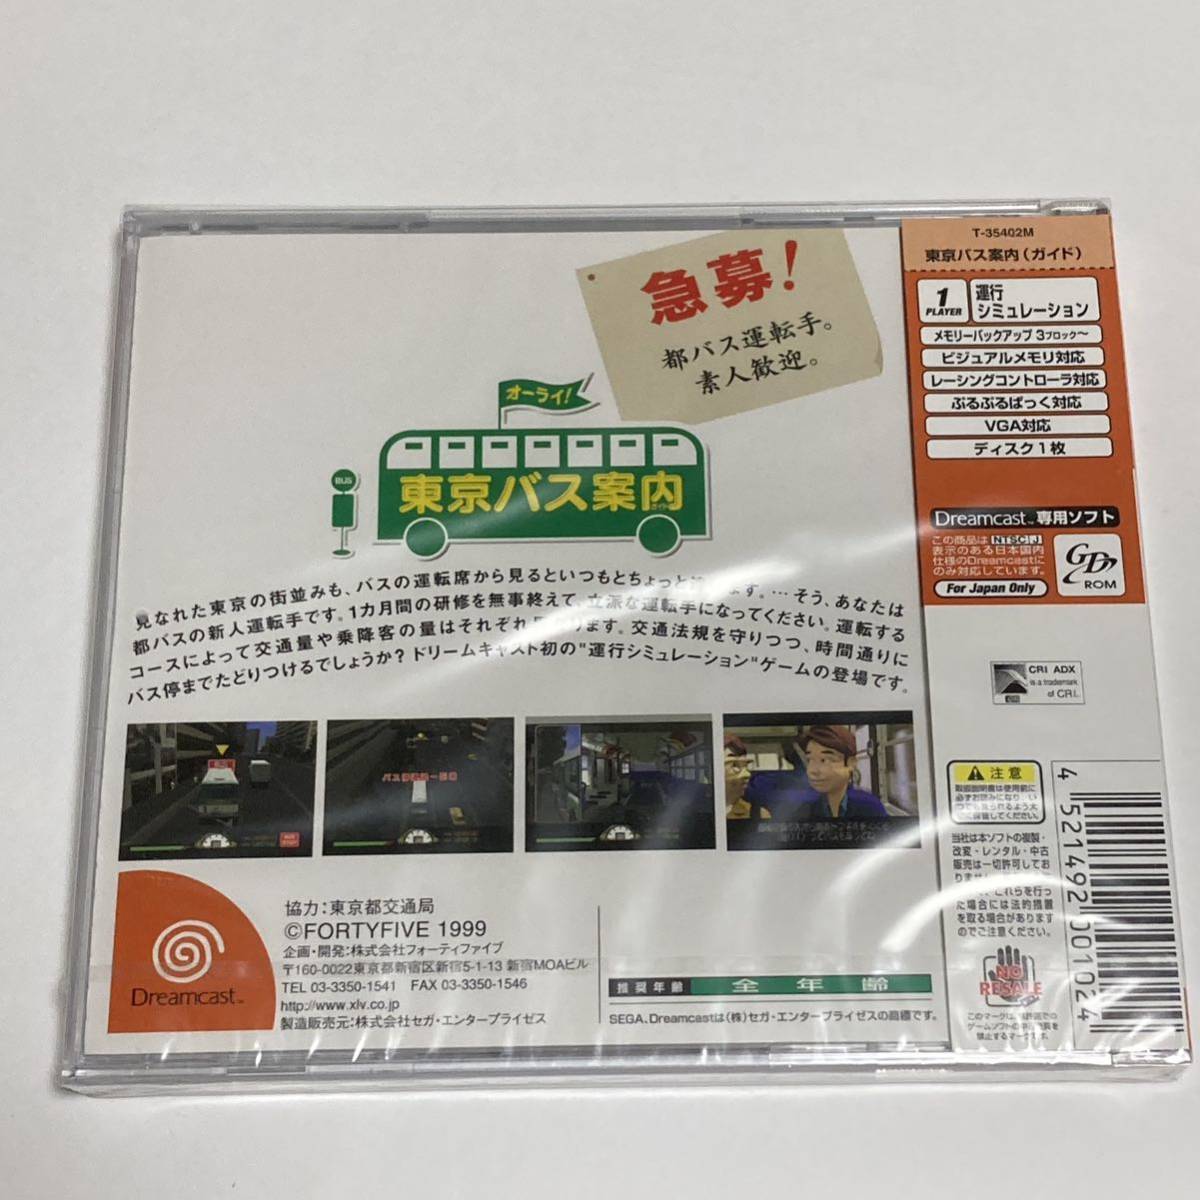 DC Tokyo bus guide ~ beautiful person bus guide .. pack ~ Dreamcast